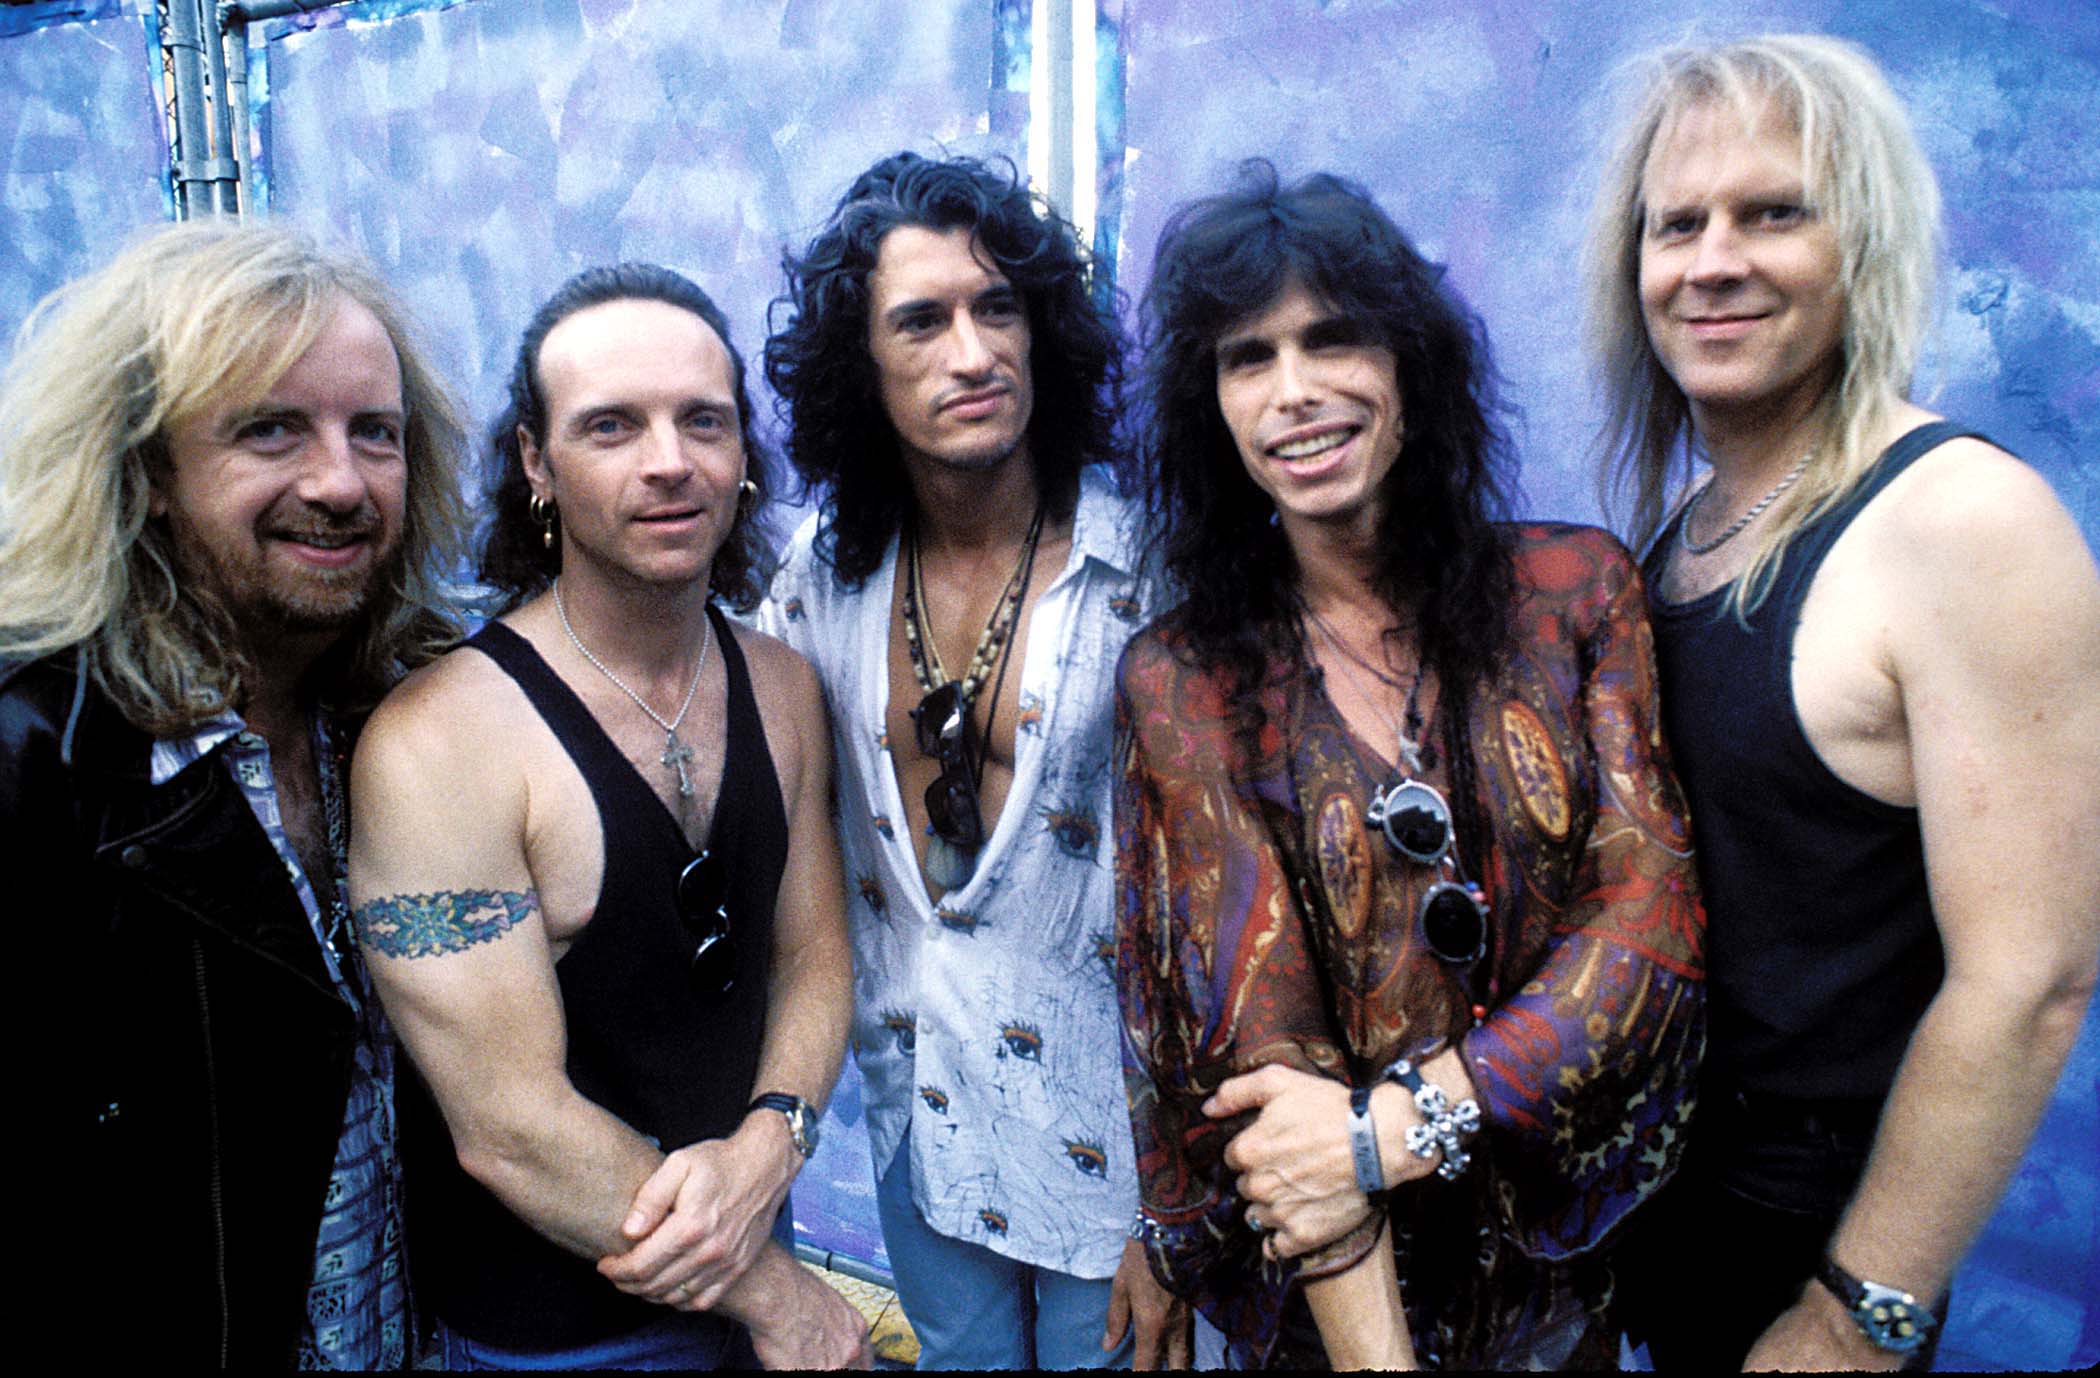 Aerosmith - Crazy (Official Video) [Remastered] 